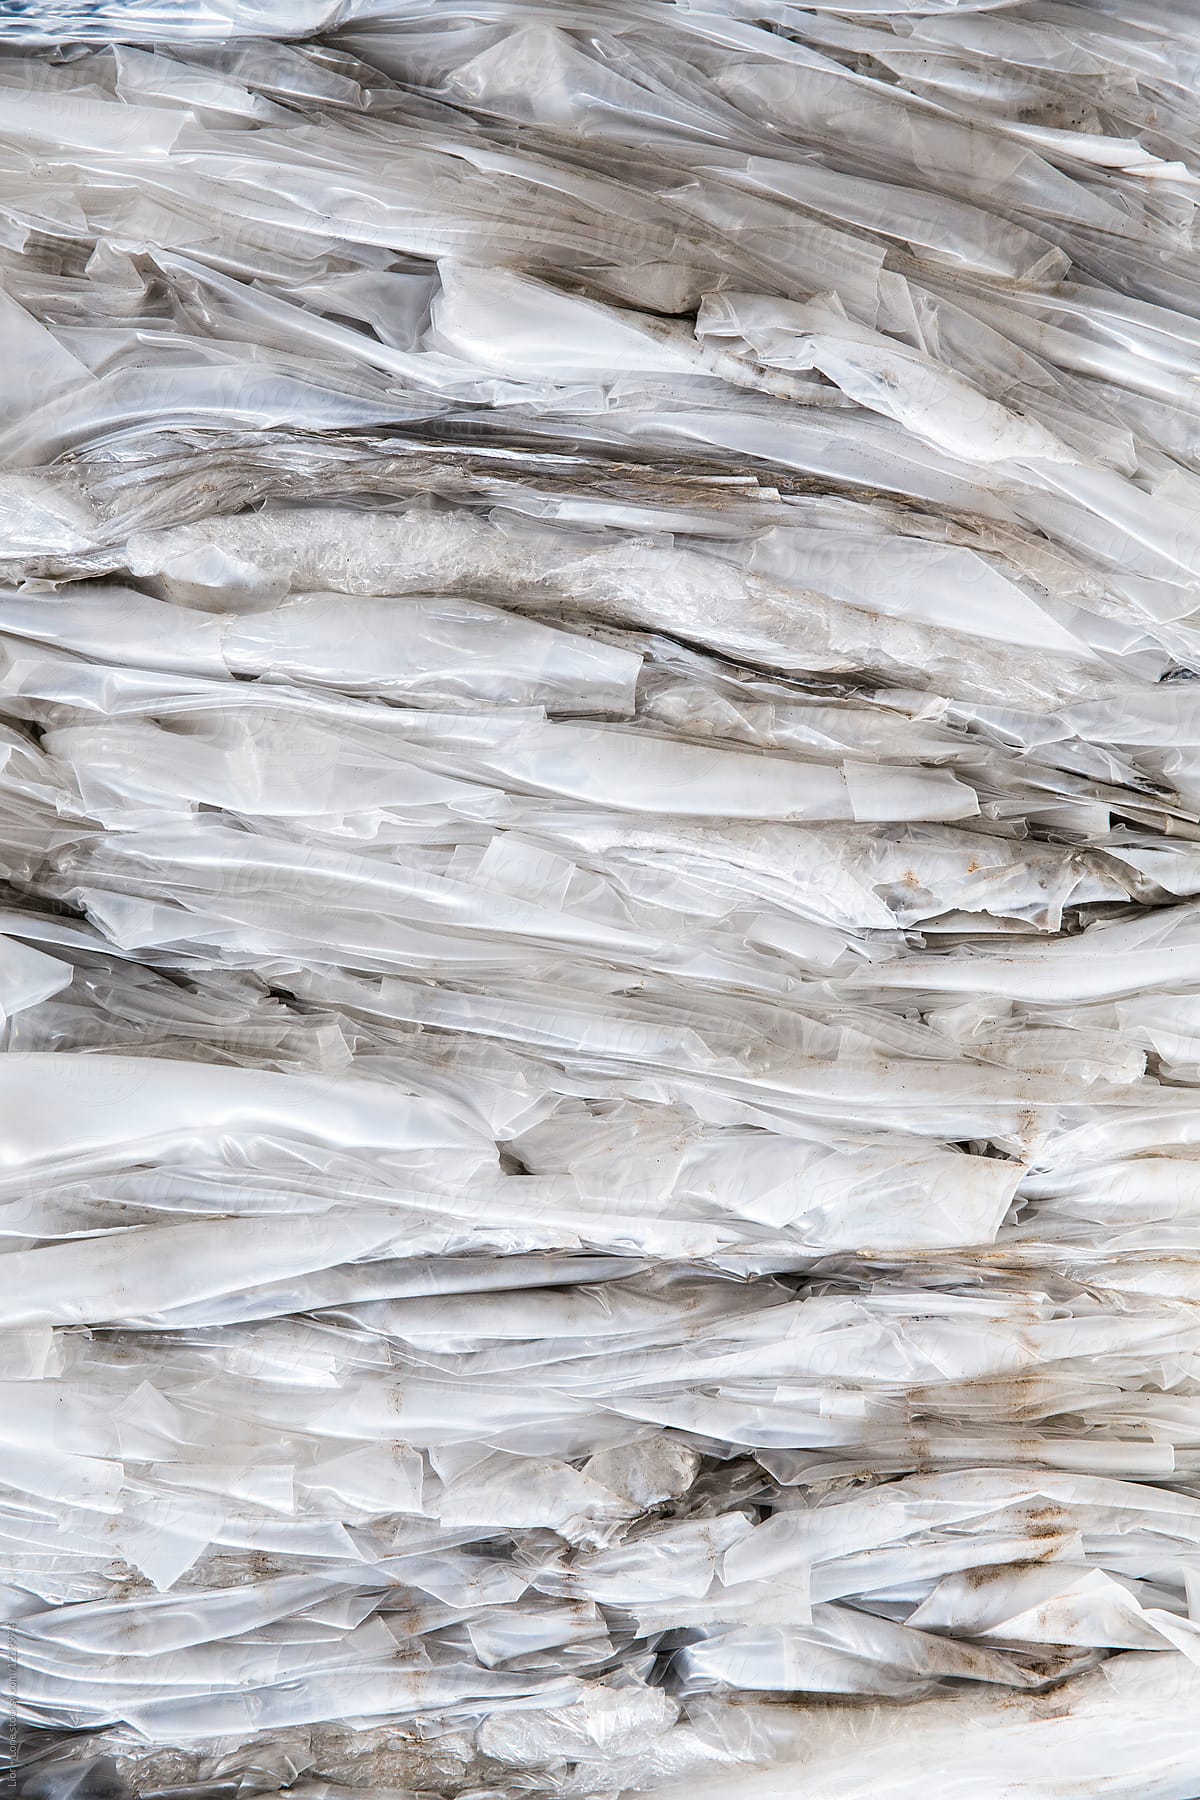 Massive stack of recycled plastic bags and sheets